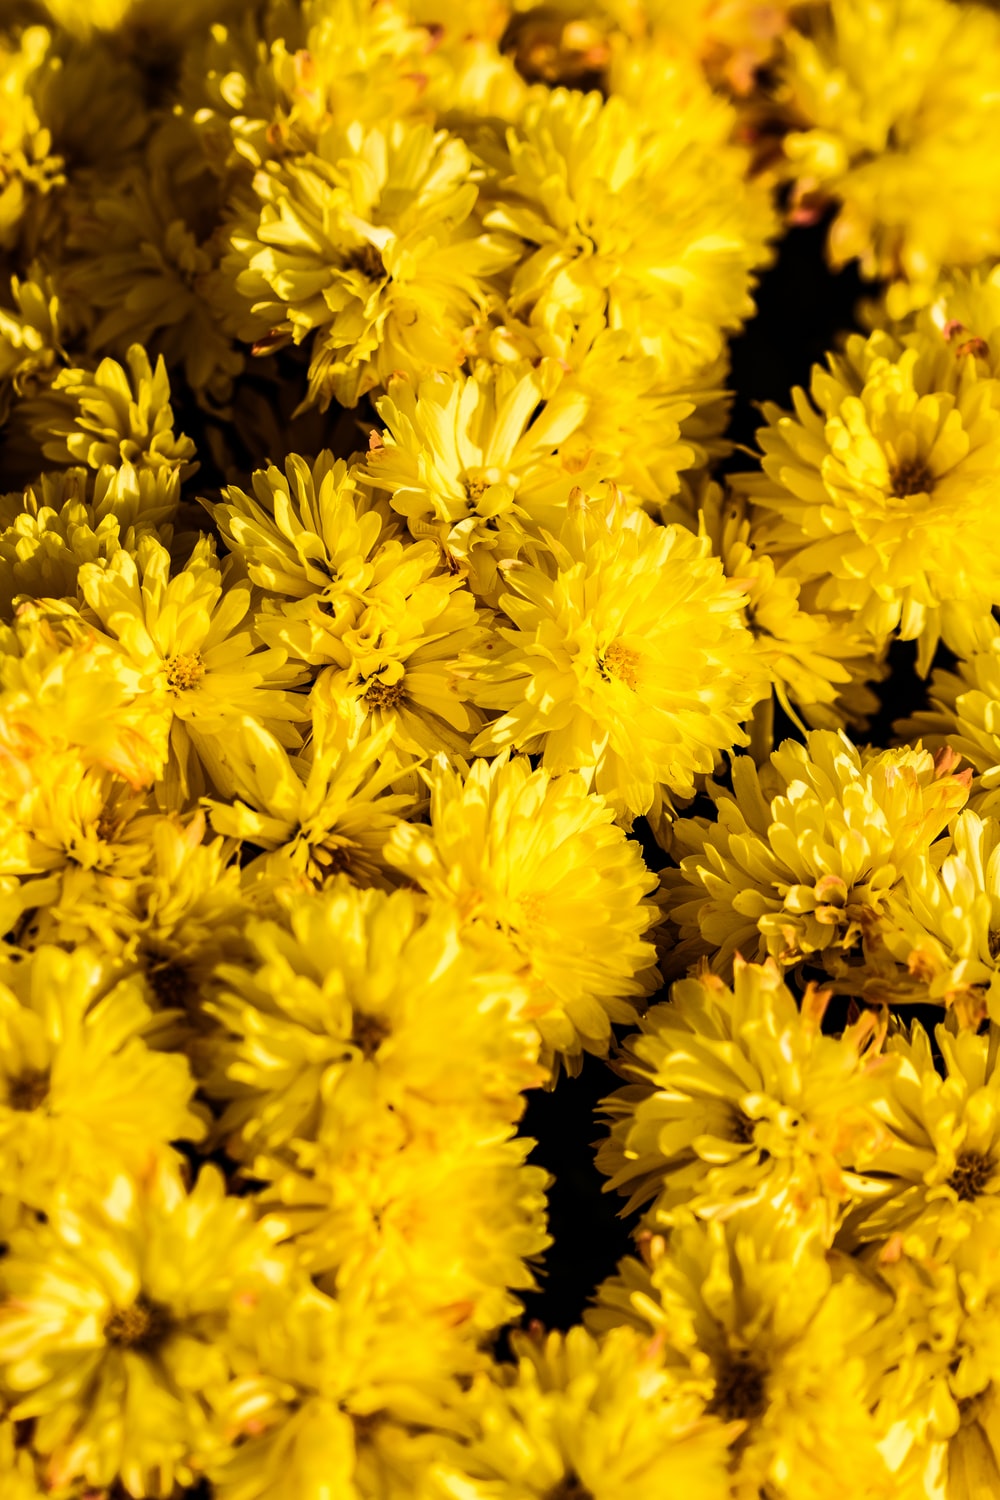 Yellow Flowers Picture. Download Free Image